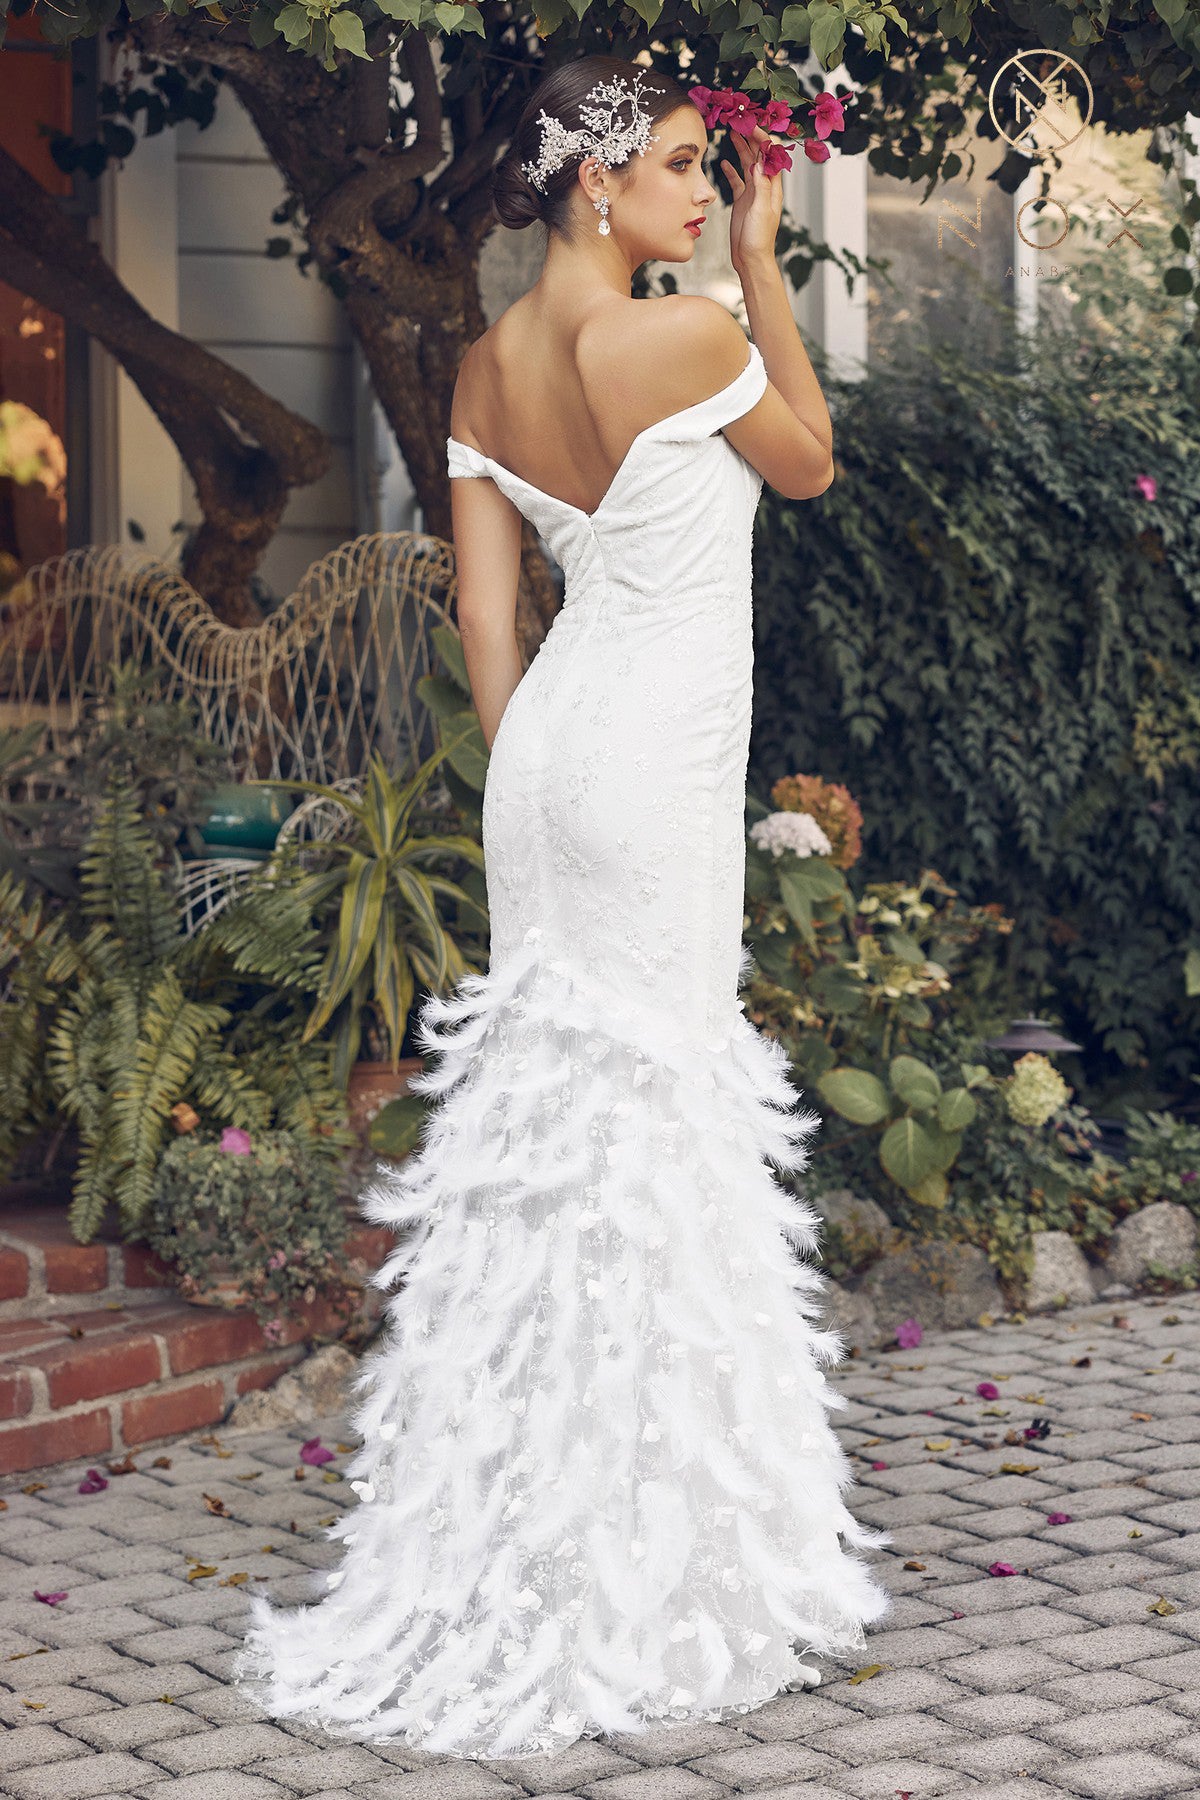 Off-shoulder gown with a fitted silhouette, featuring a stunning beadwork design and feathered accents. The skirt creates a sheath silhouette that flows to the full-length hem.